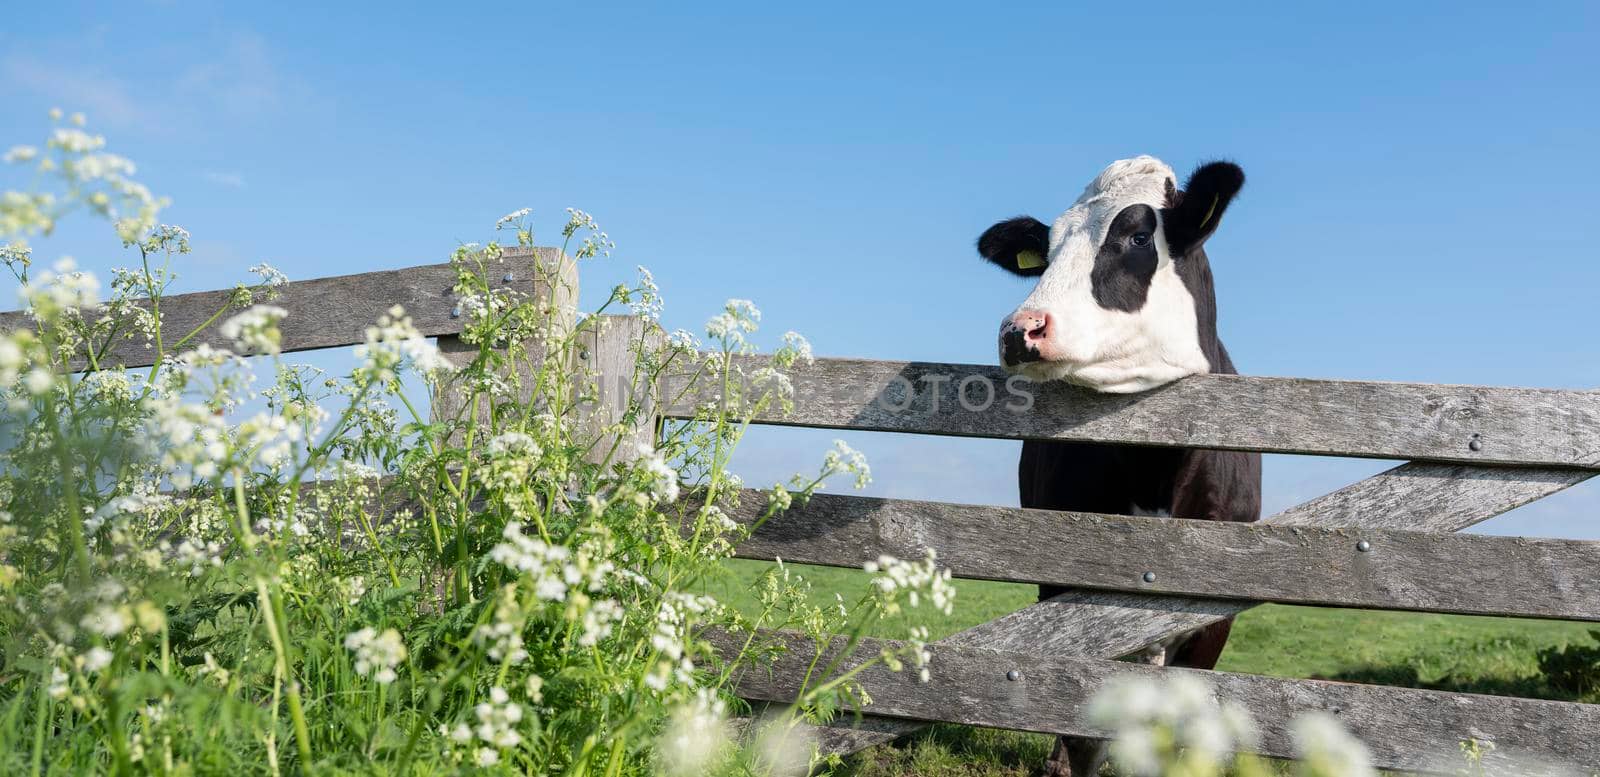 young black cow in meadow behind wooden gate and spring flowers under blue sky in holland